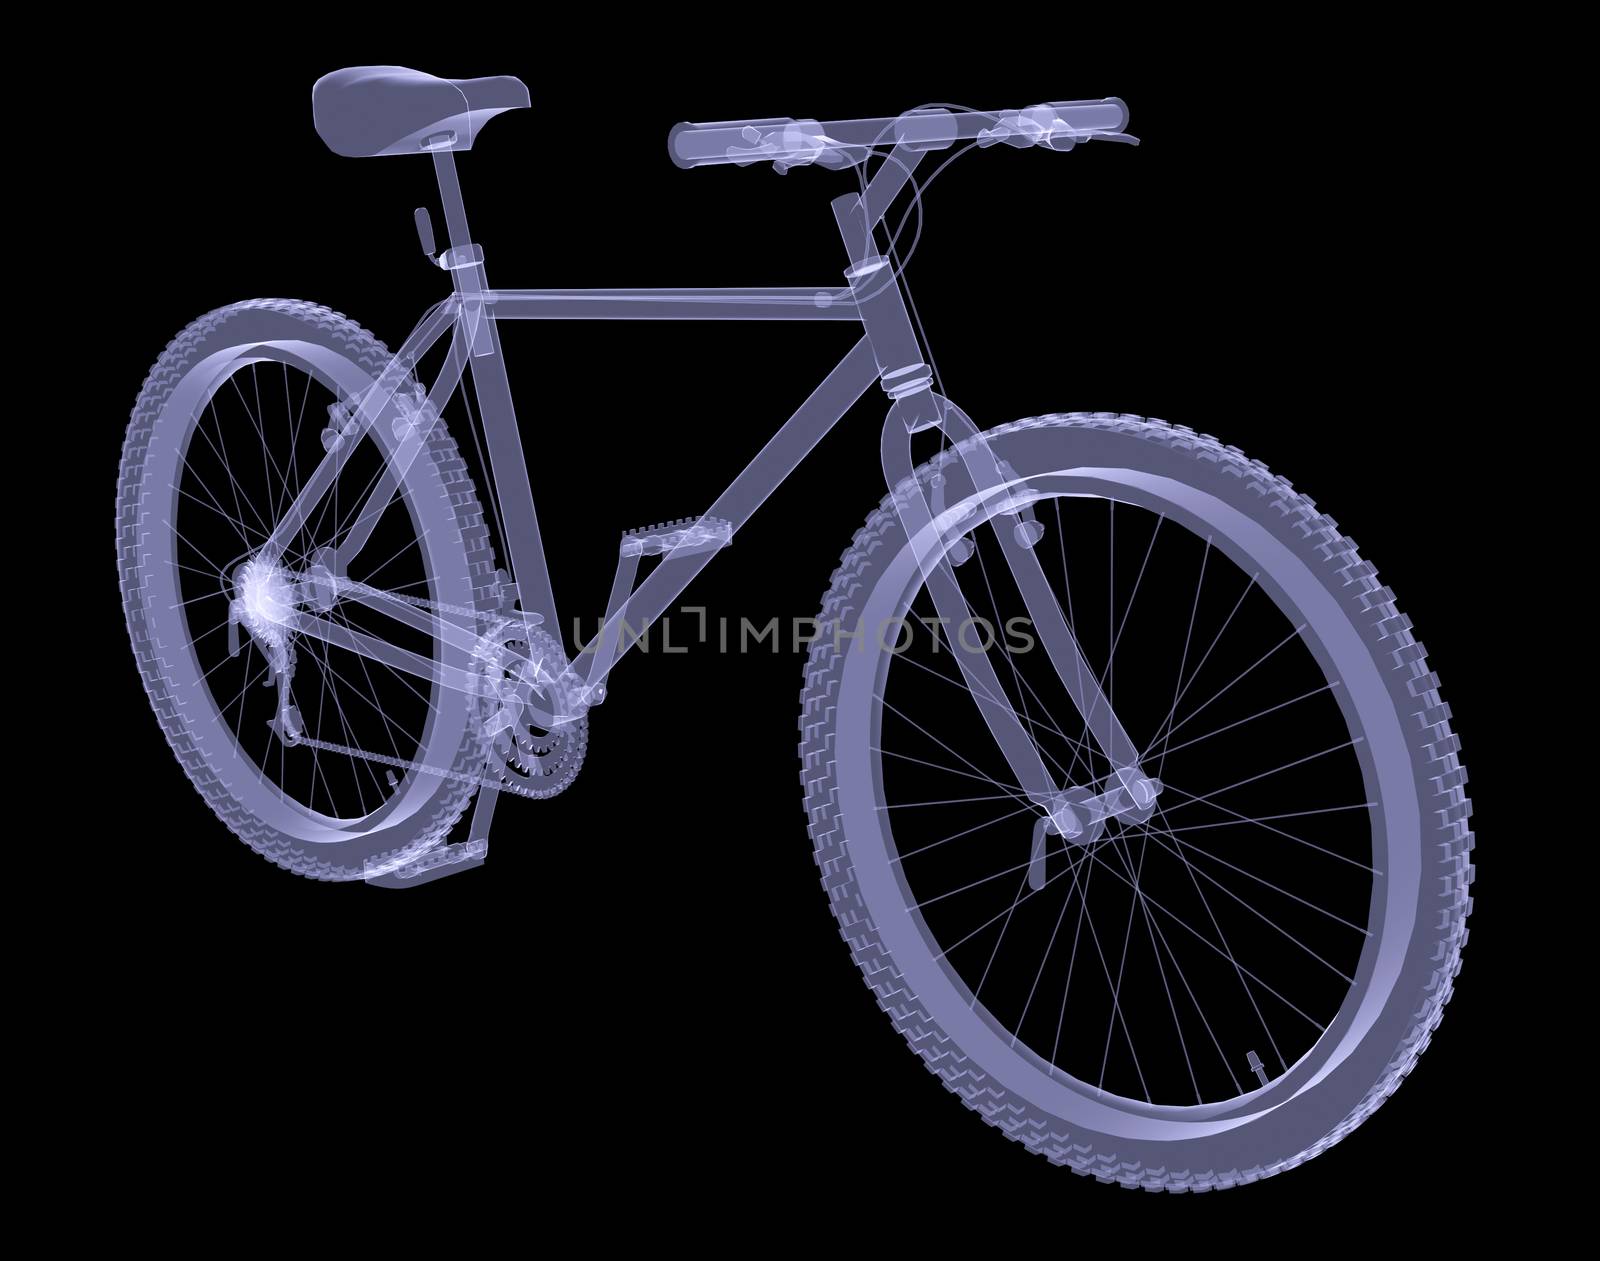 Bicycle. The X-ray render on a black background